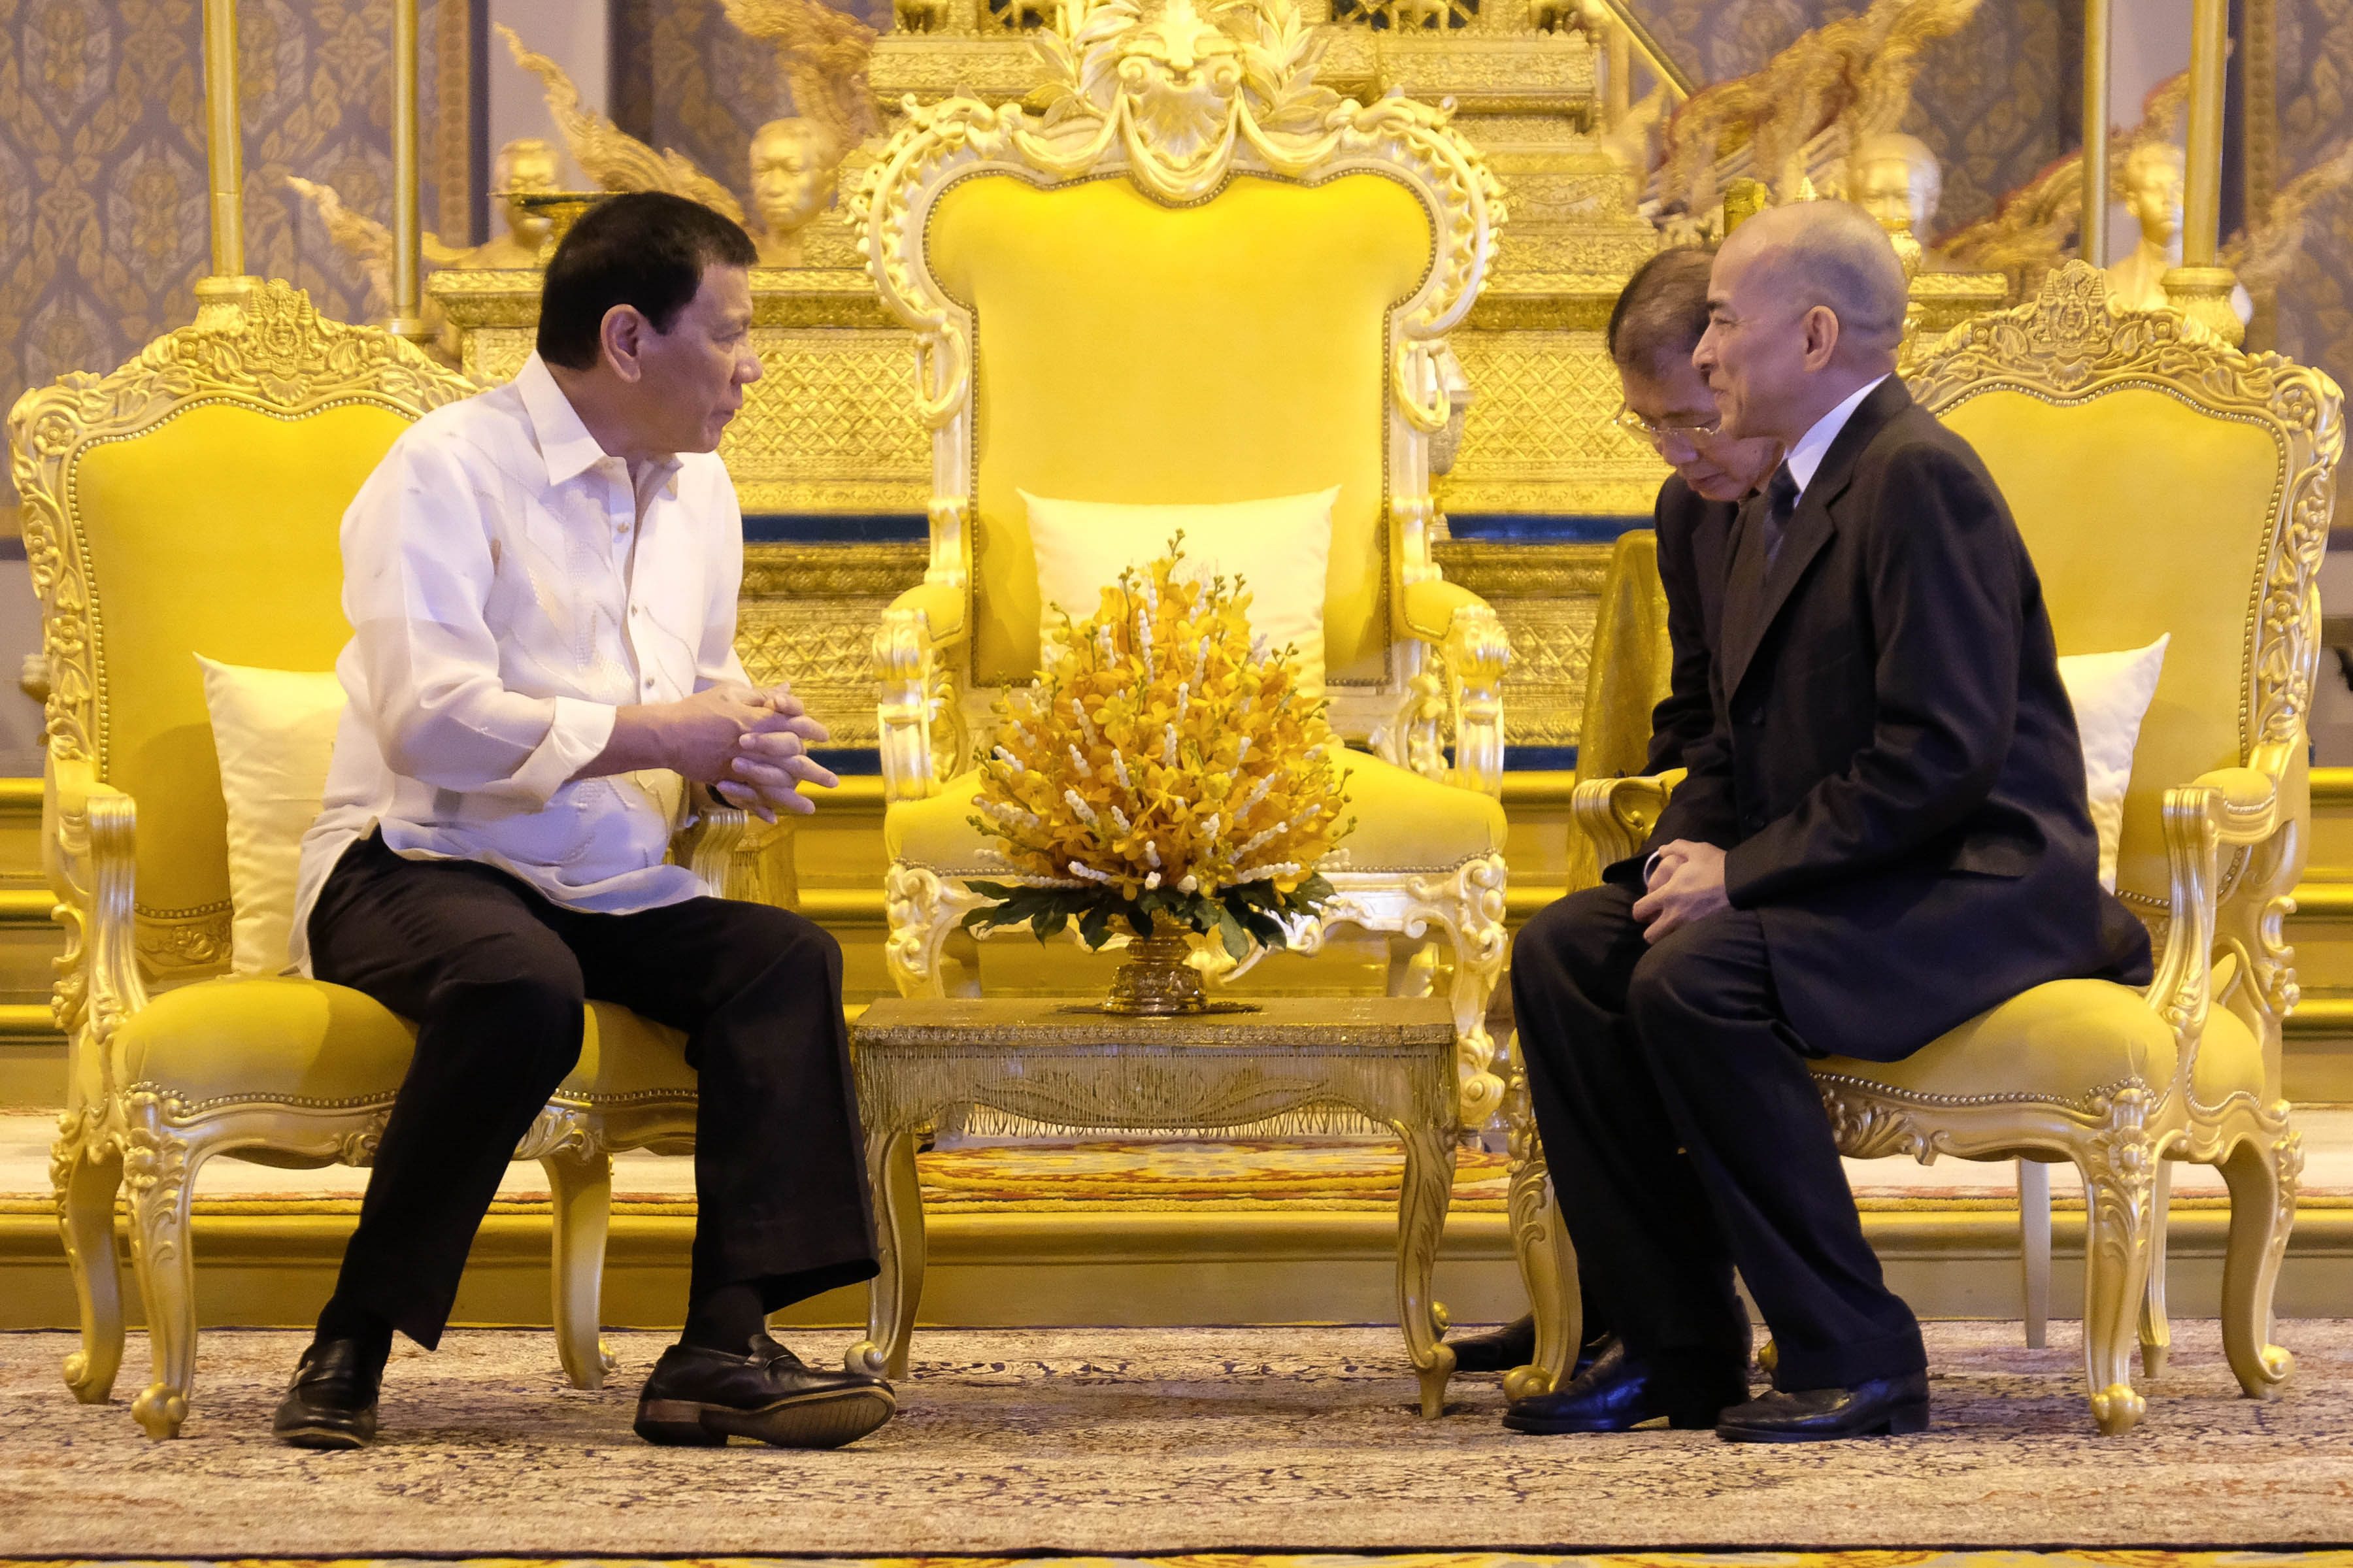 A GOOD TALK. President Duterte and King of Cambodia Norodom Sihamoni engage in a discussion during a meeting at the Throne Hall of the Royal Palace 